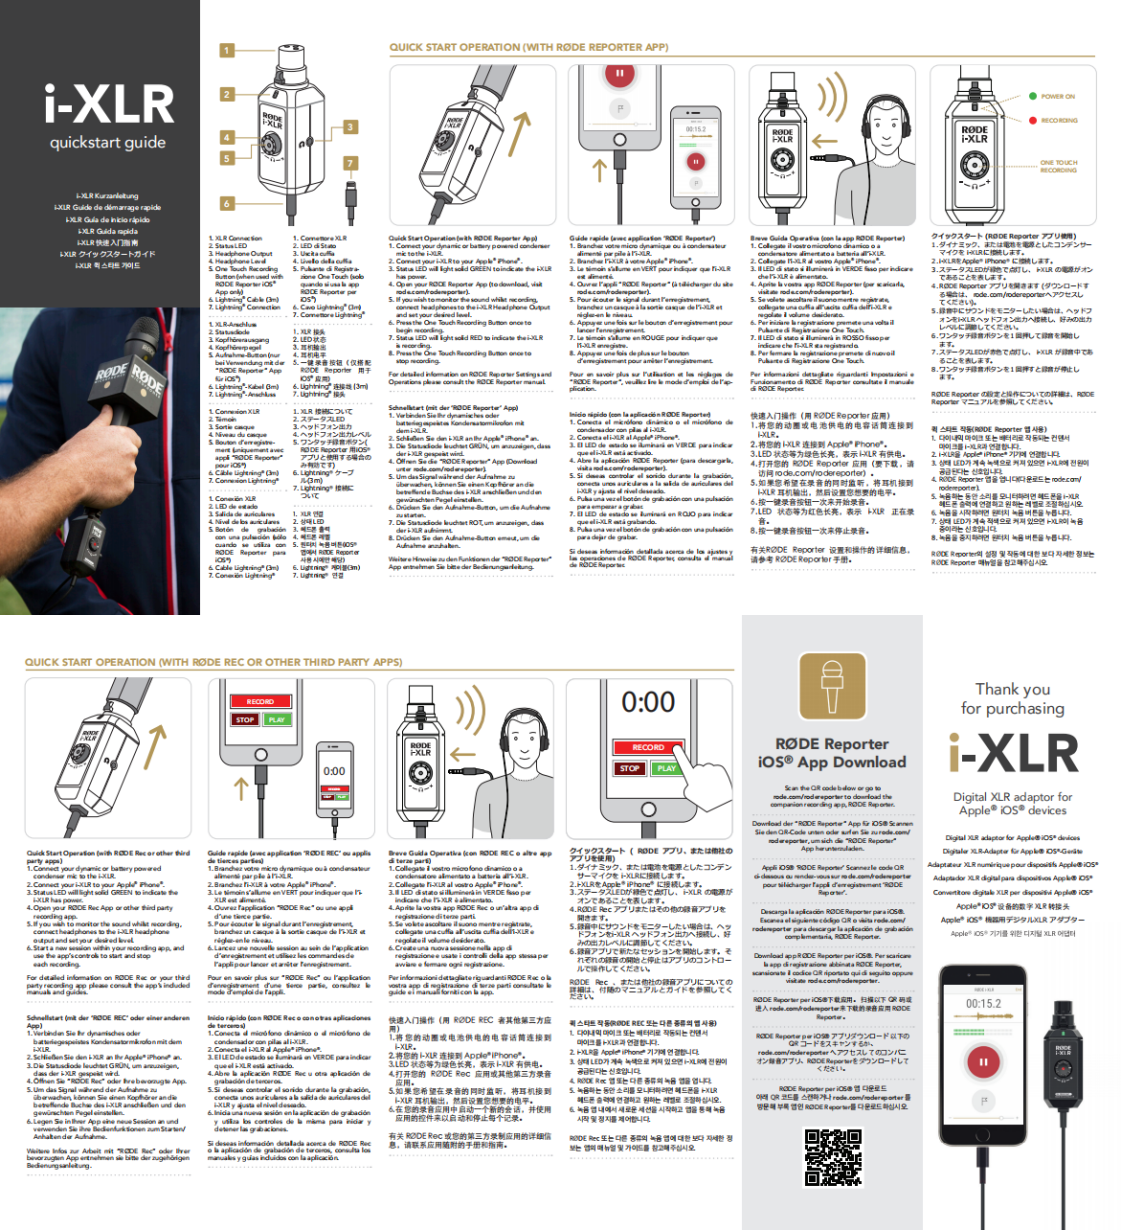 i-XLR_quickstart_guide_Chinese_0.png